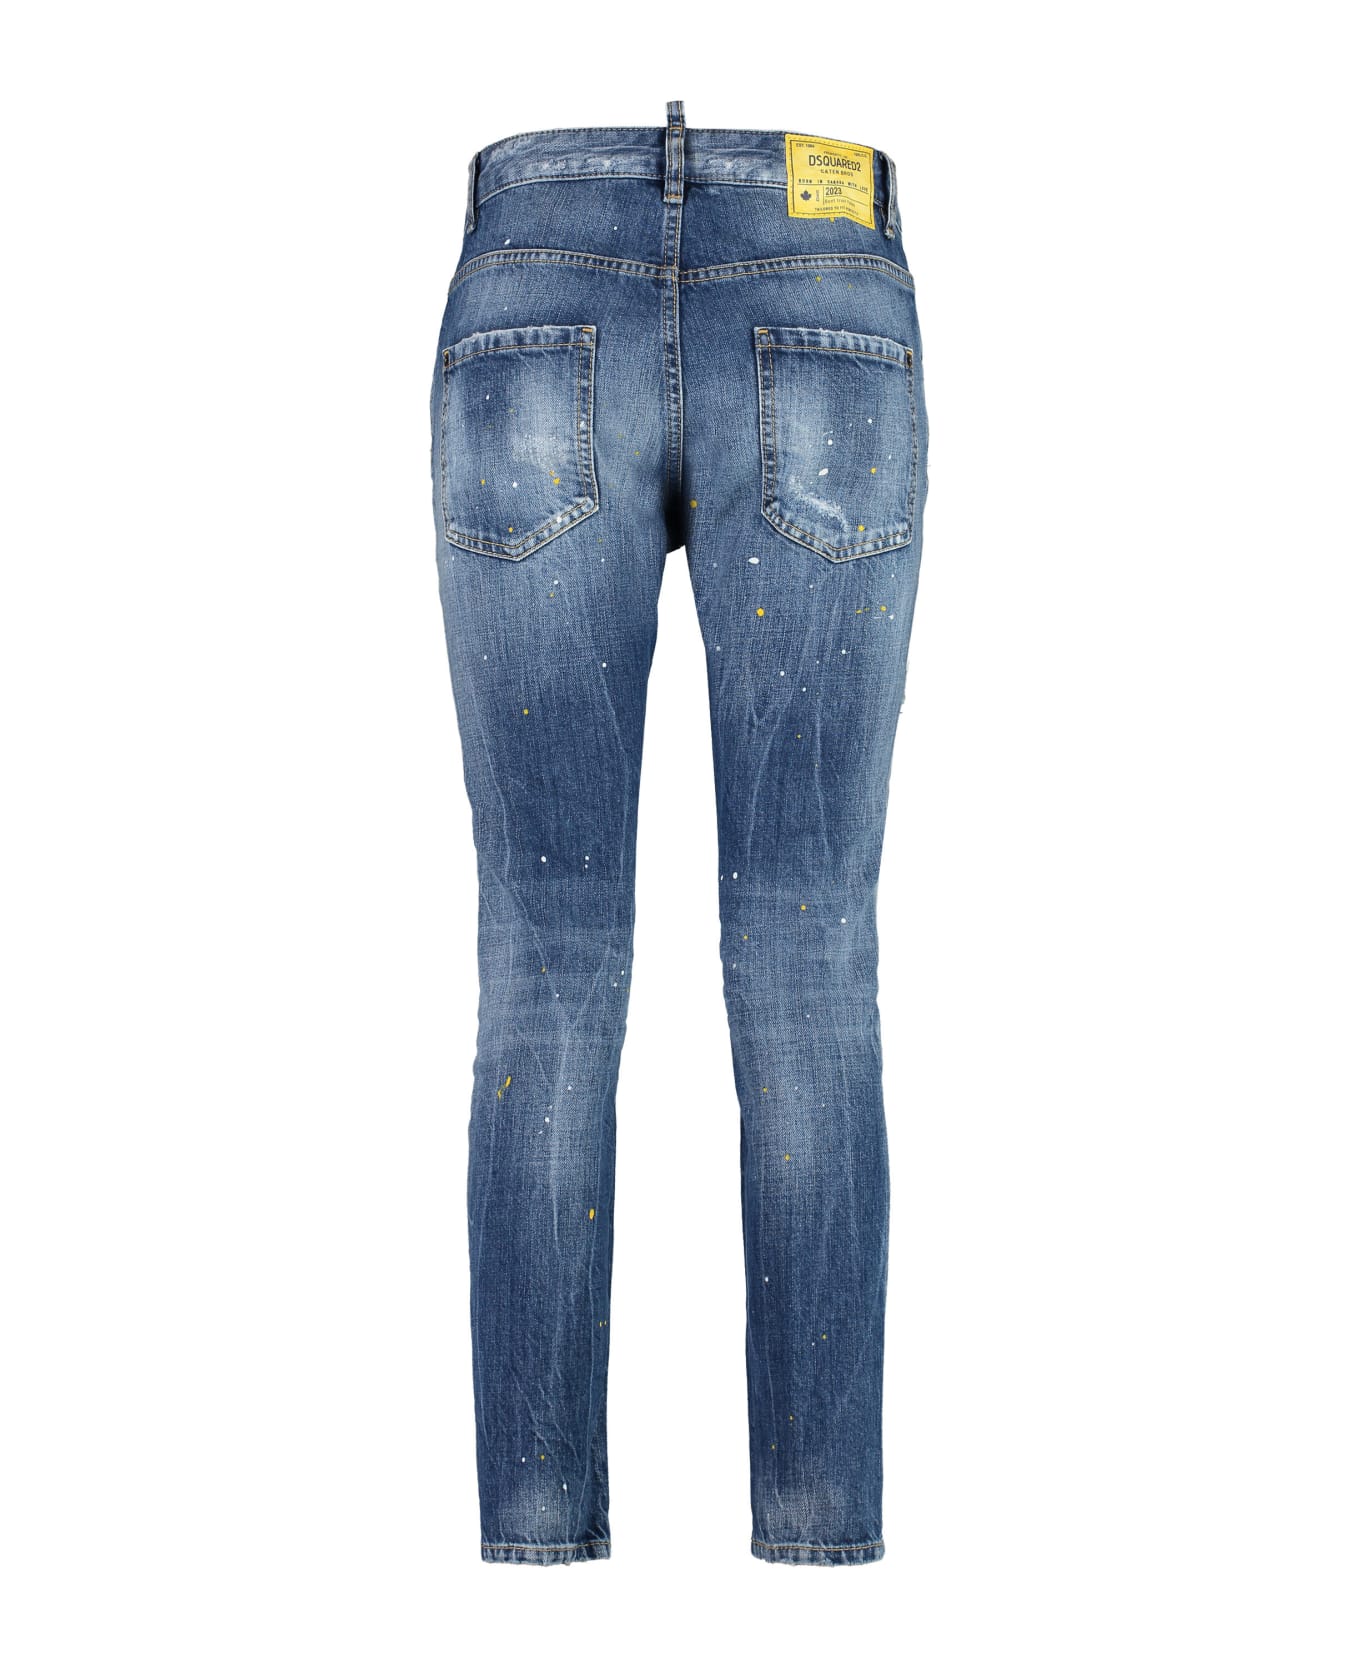 Dsquared2 Cool Girl Cropped Jeans - Denim